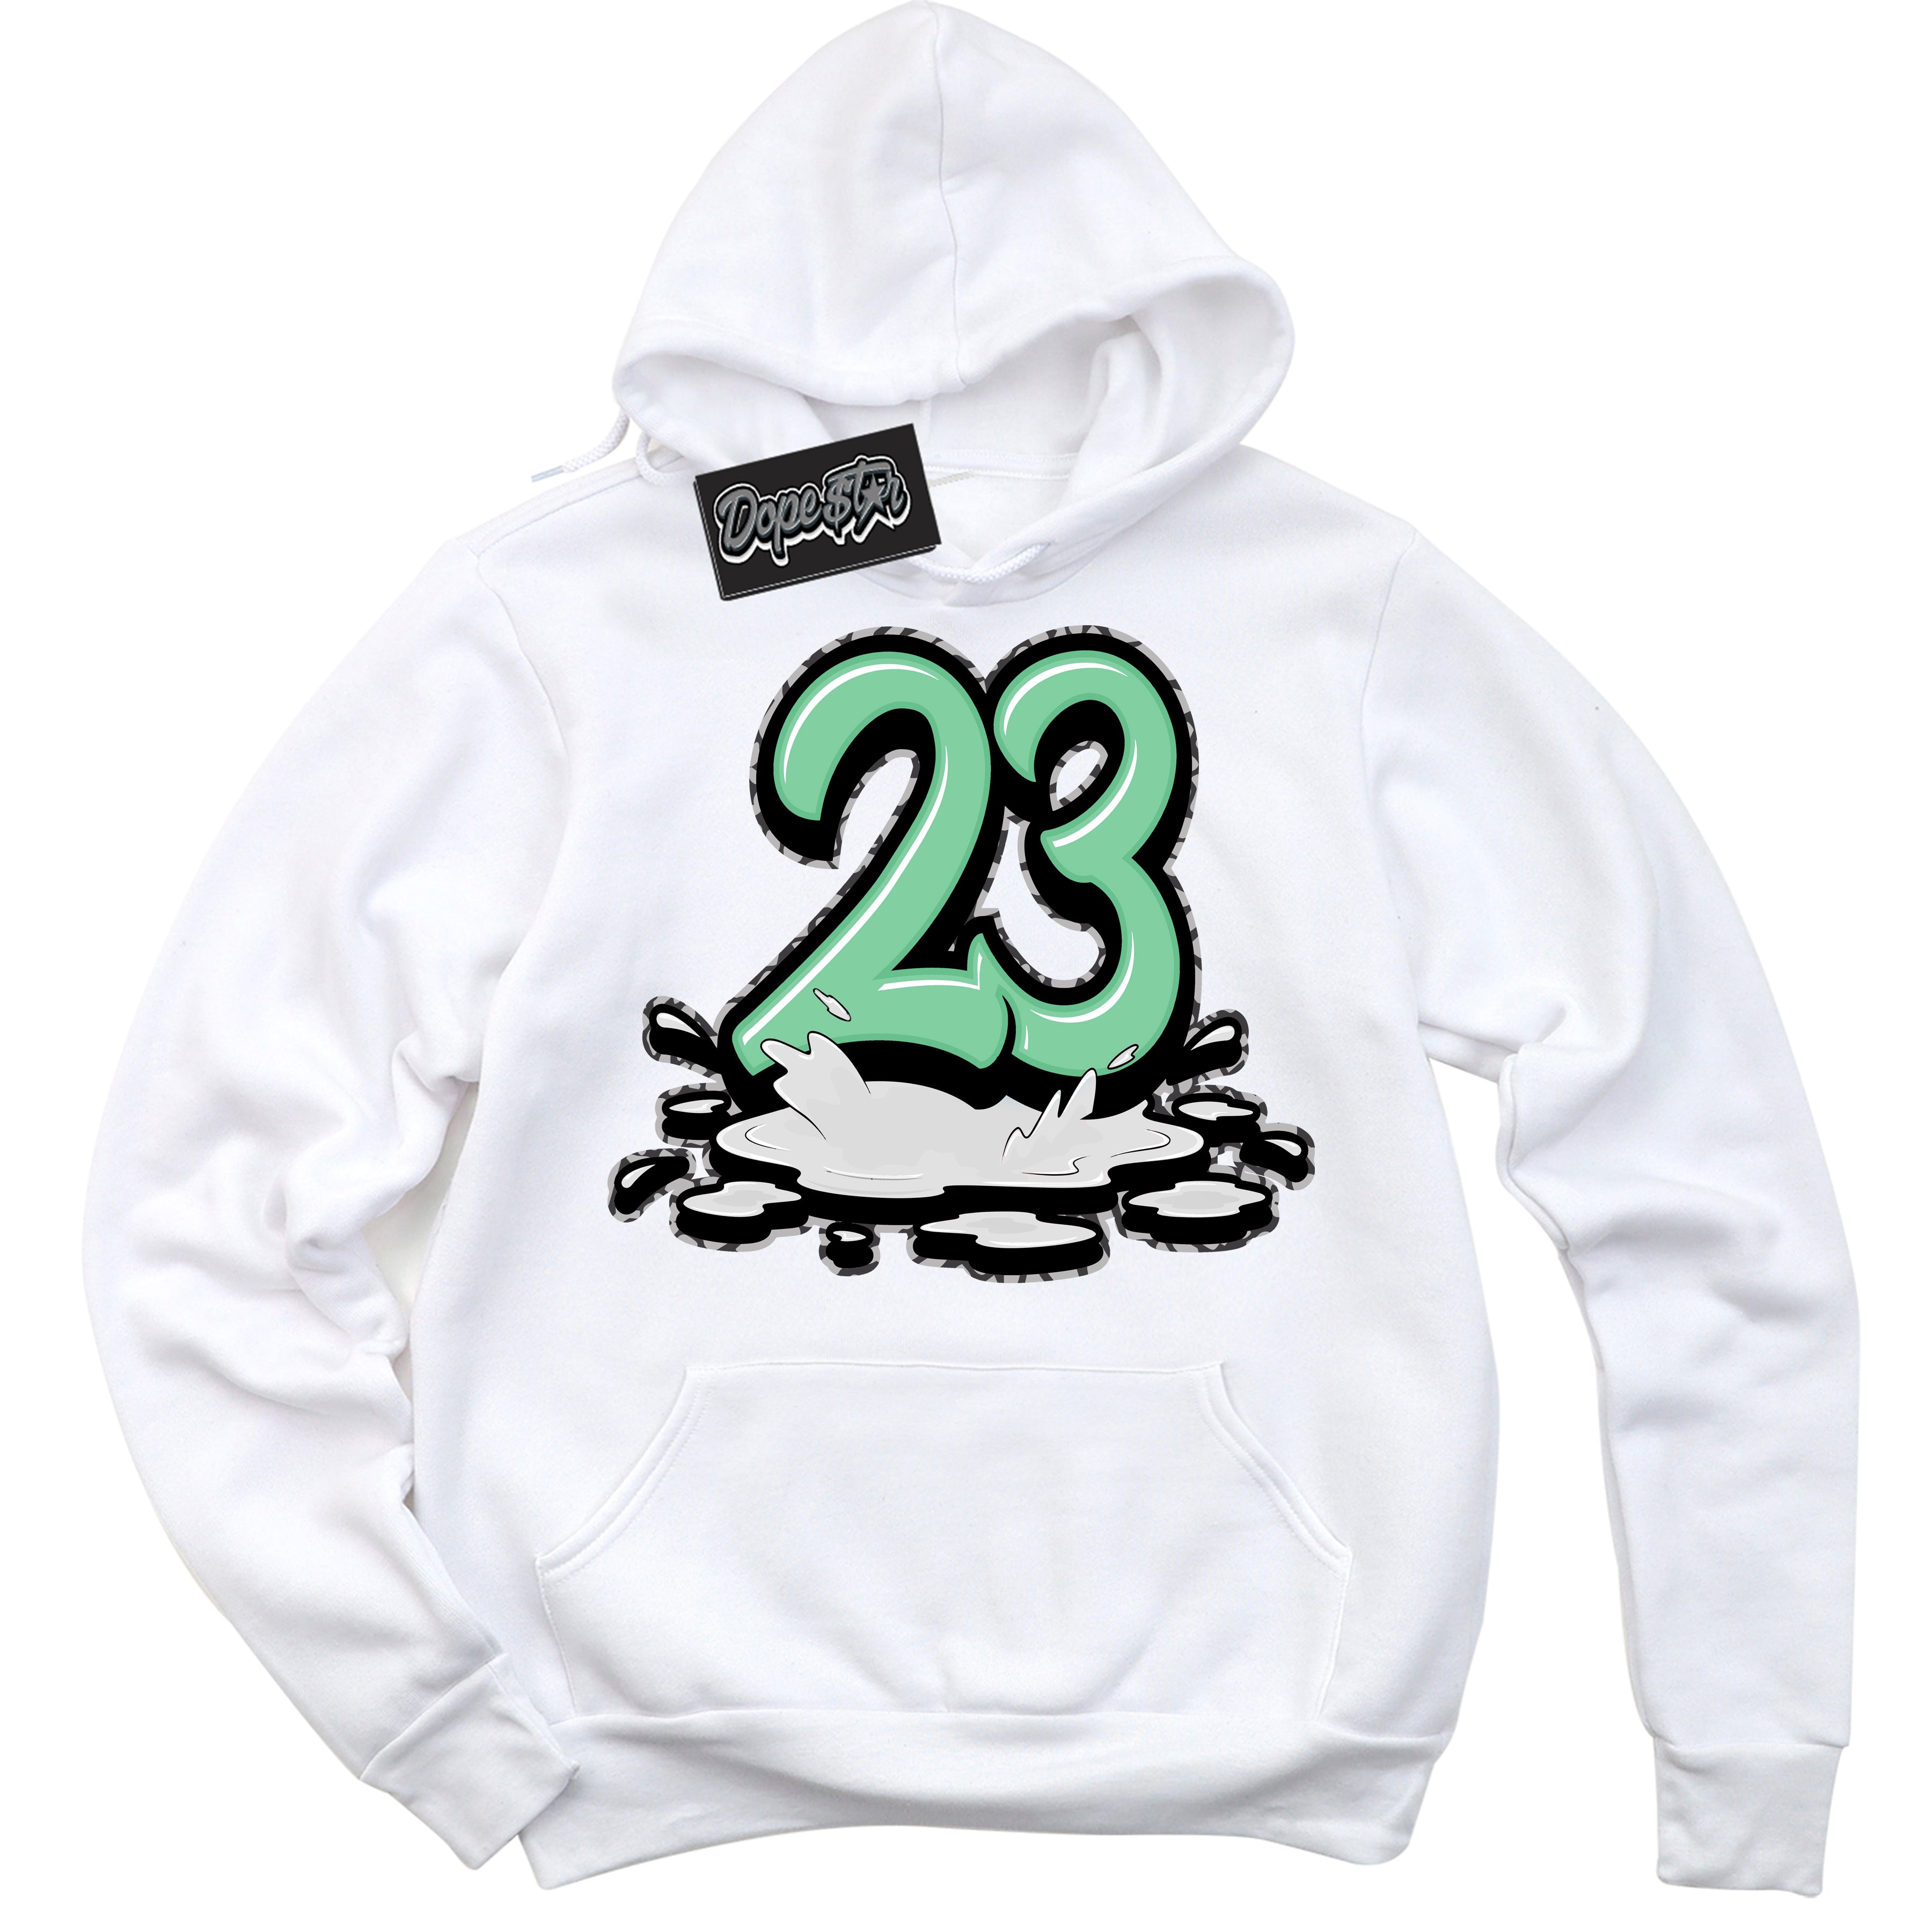 Cool White Graphic DopeStar Hoodie with “ 23 Melting “ print, that perfectly matches Green Glow 3s sneakers